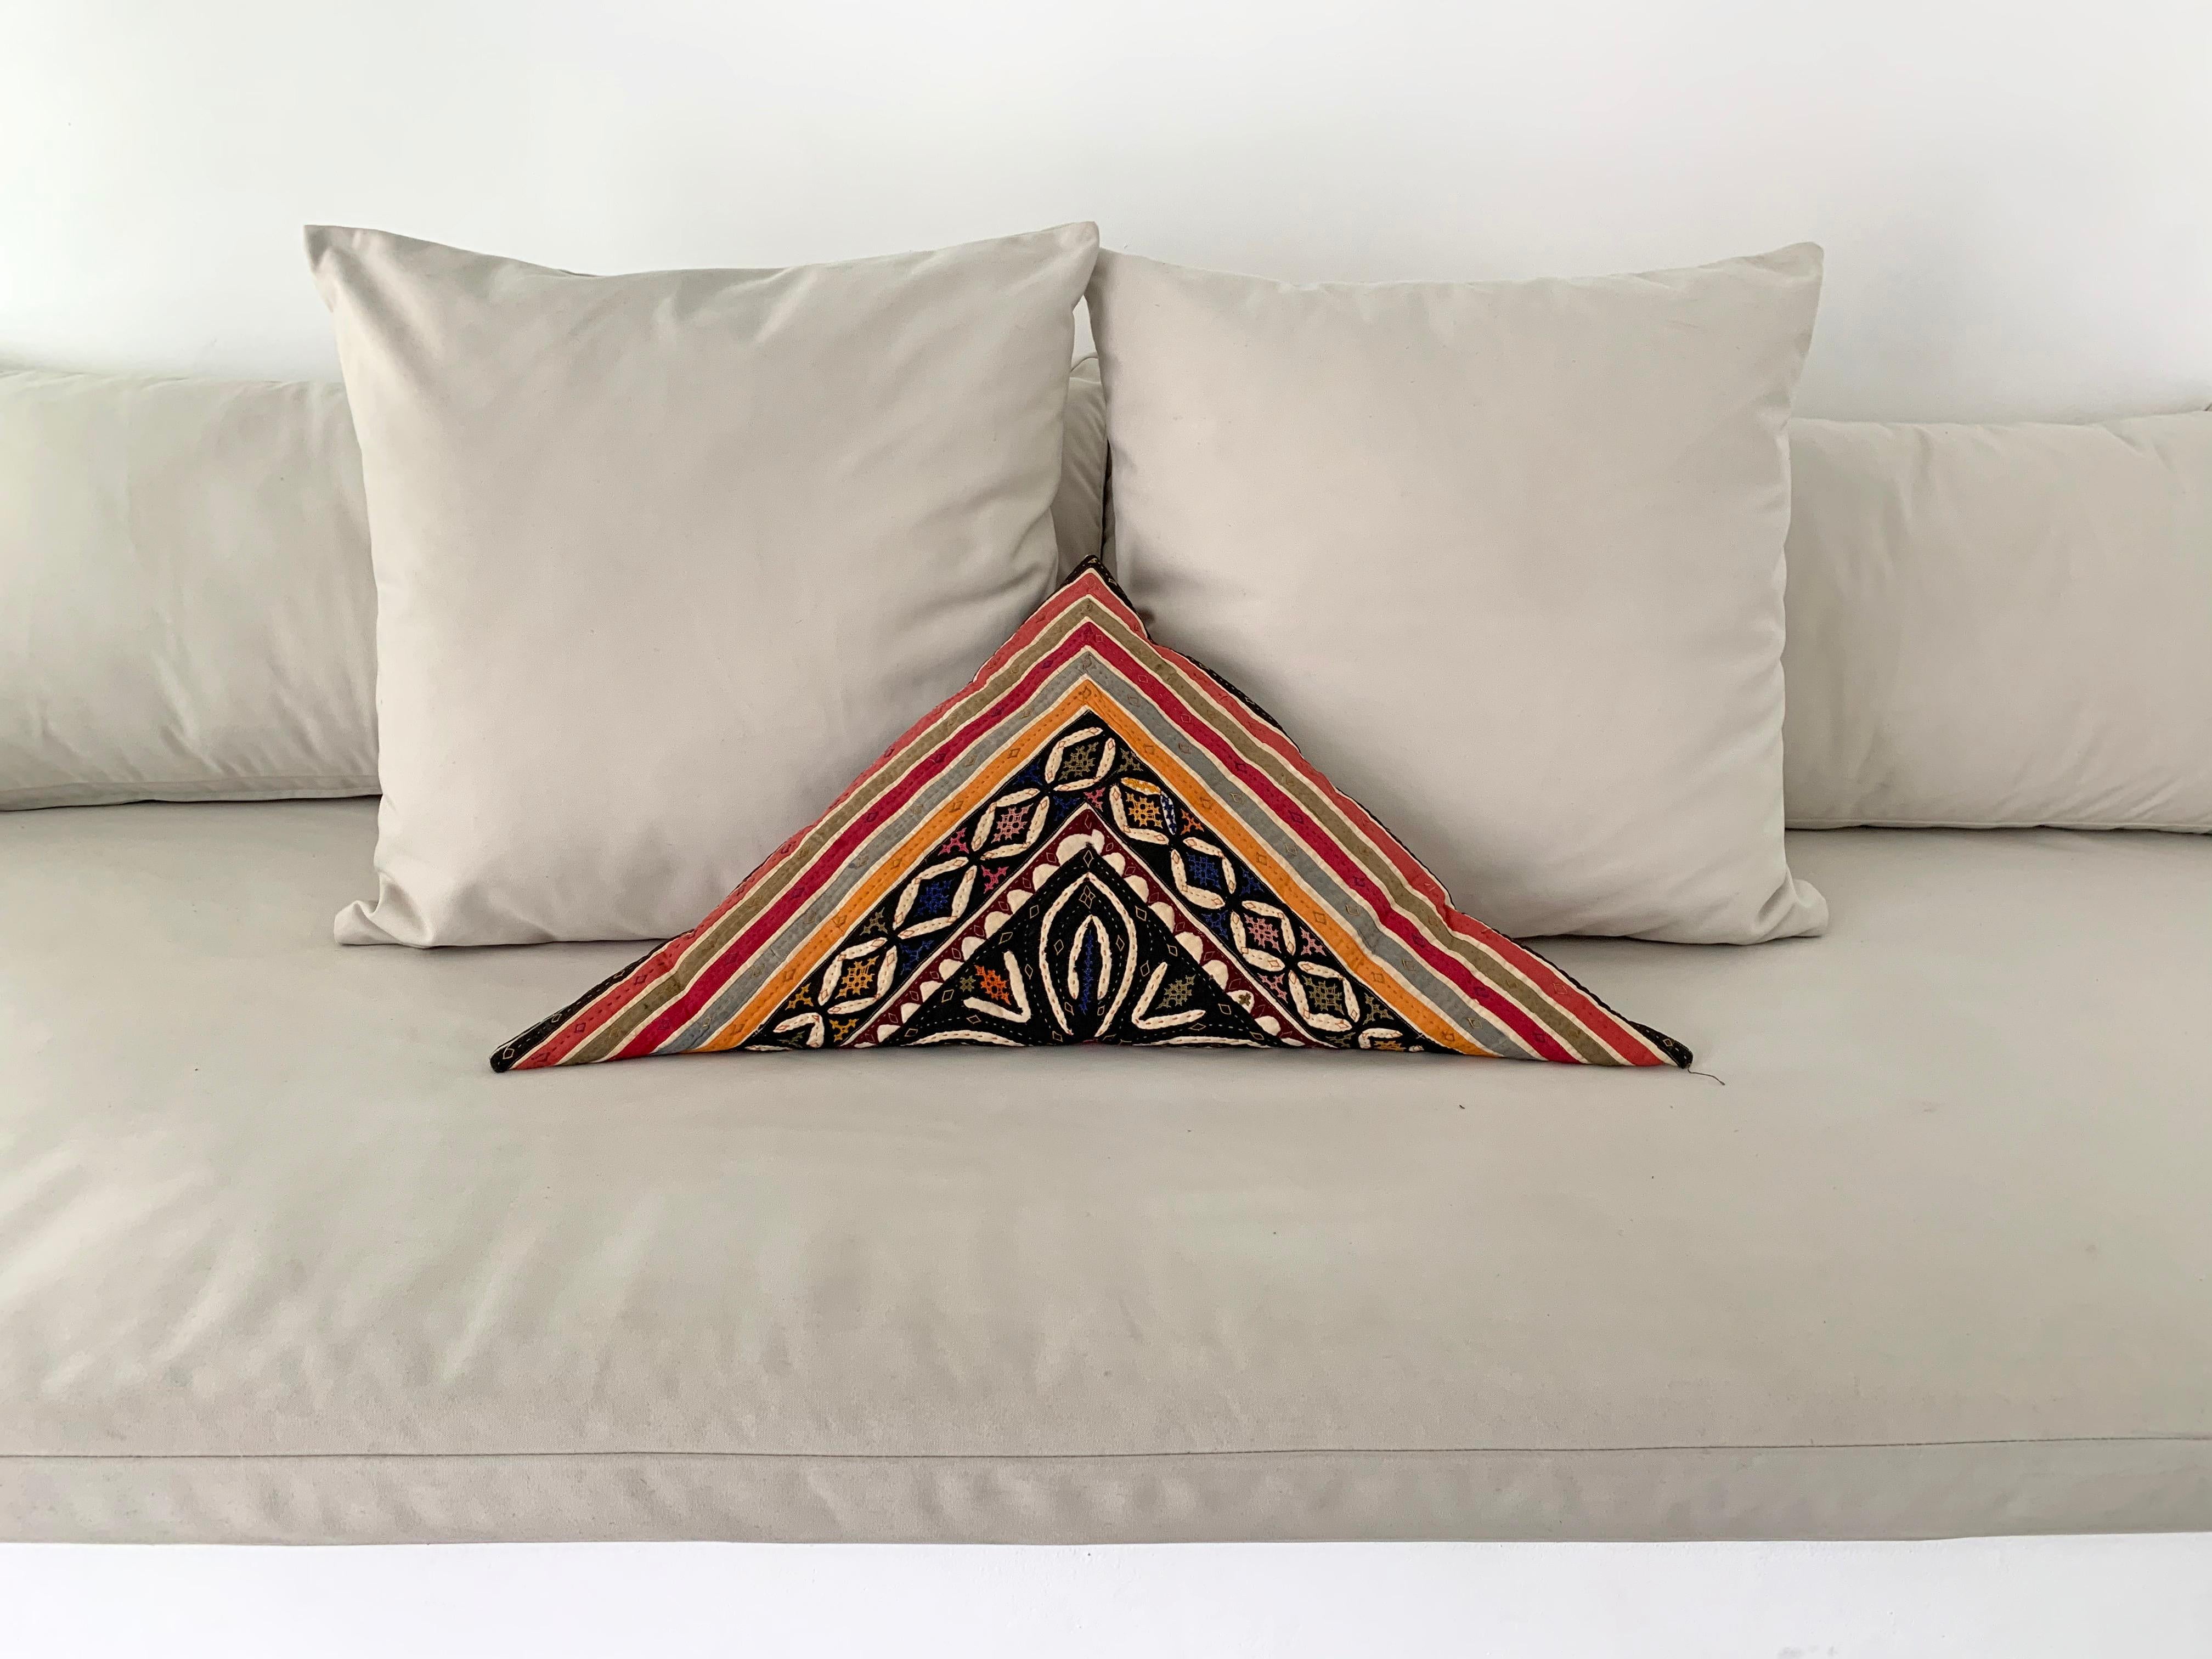 This vintage pillow features colourful embroidery and was made using vintage Indian fabric. It features a zip on the side to remove/clean the pillow insert. 

Size: Height 39cm x Width 84cm x Depth 9cm.